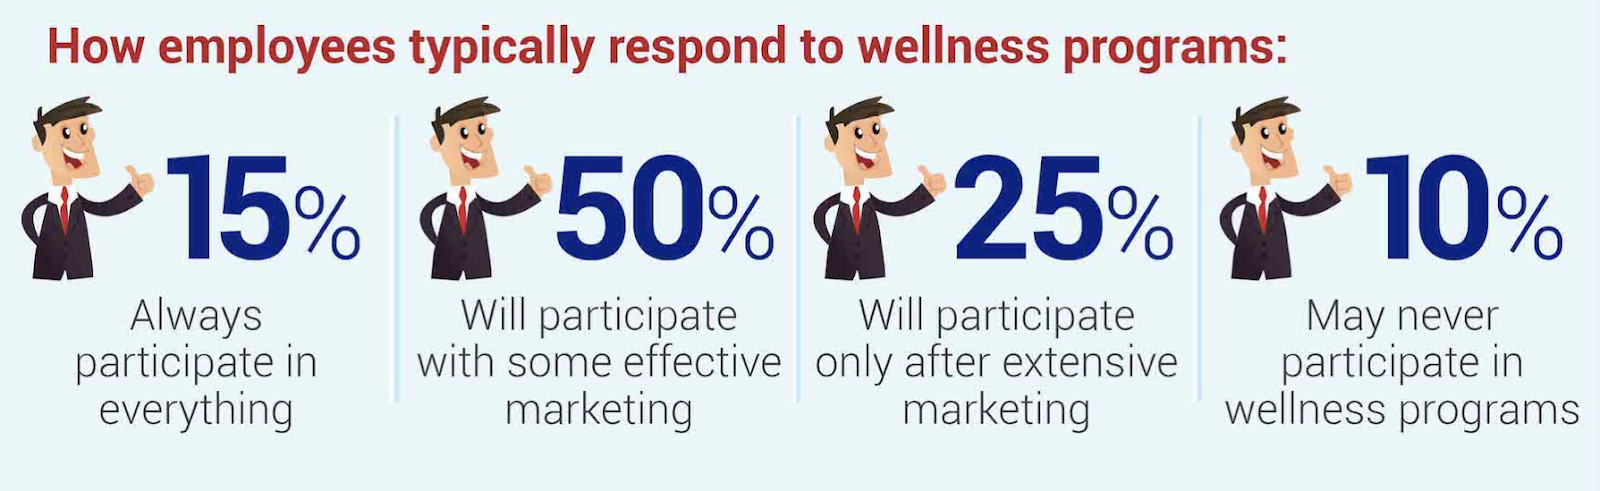 how employees typically respond to wellness programs